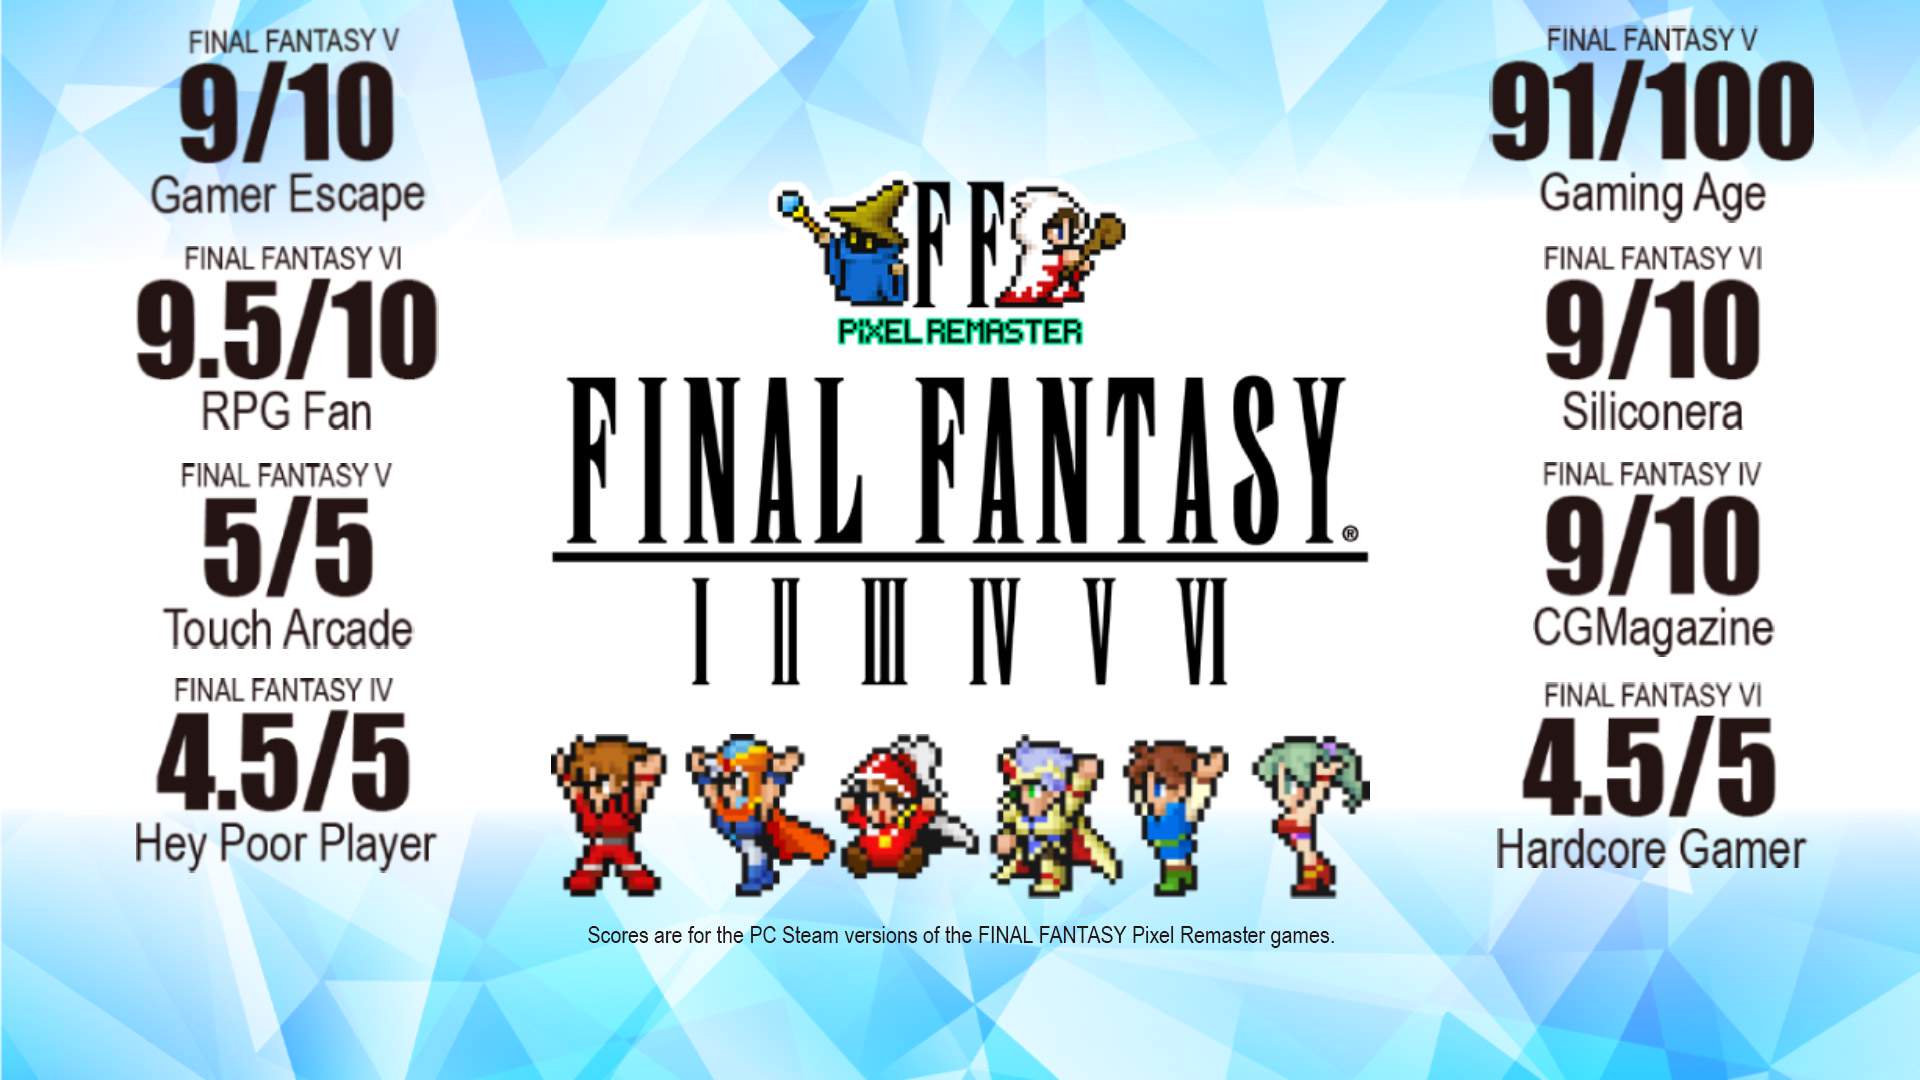 FINAL FANTASY Pixel Remaster logo with pixel characters. High score accolades on the left and right.